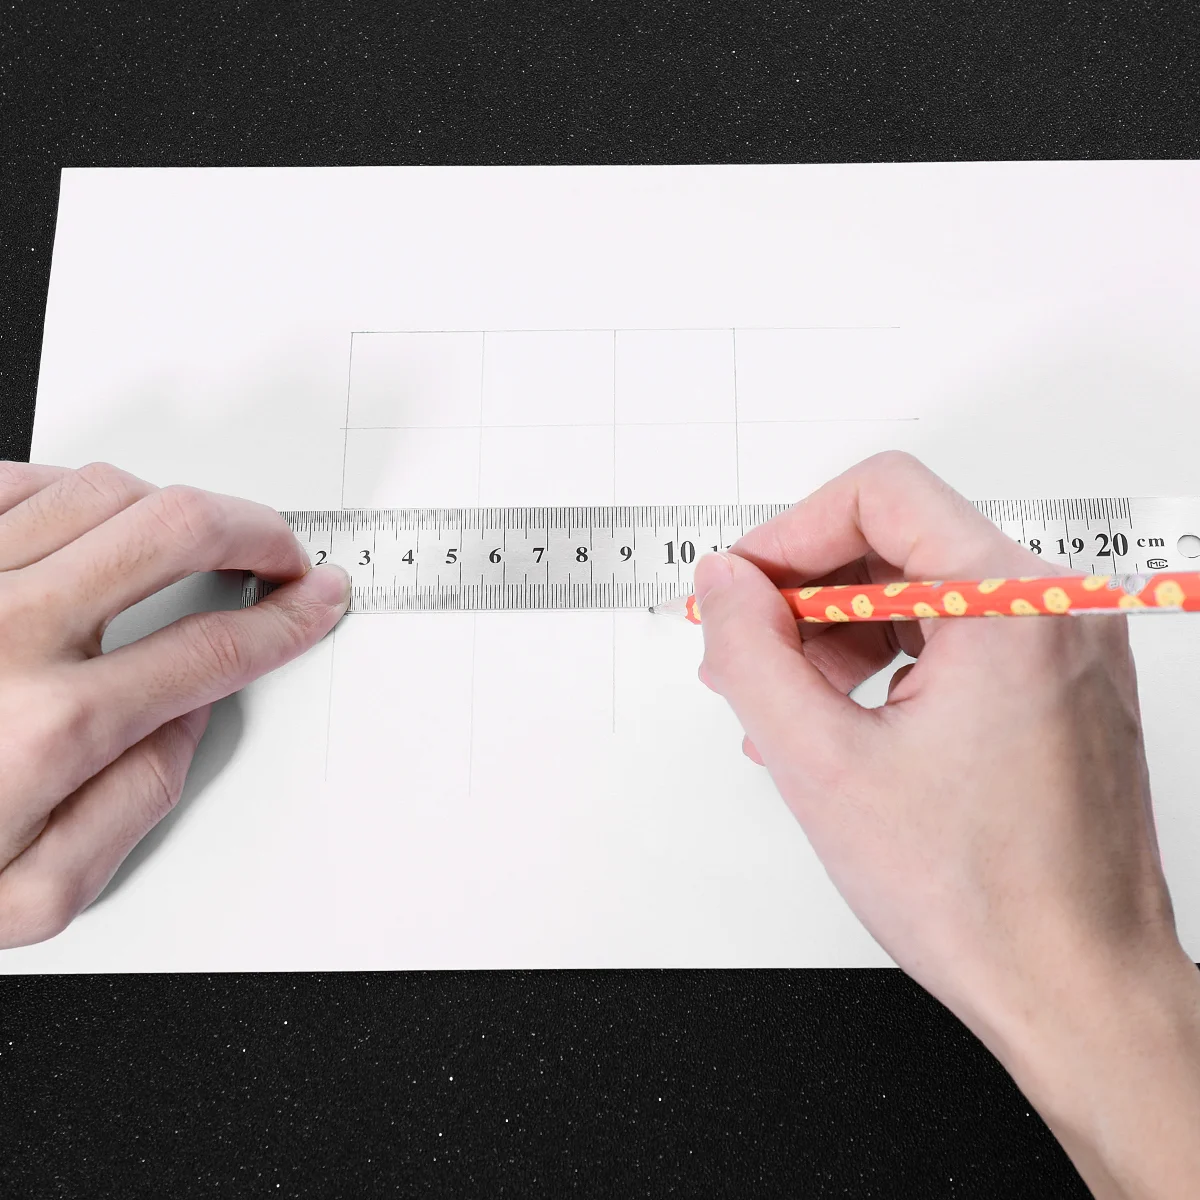 

Stainless Steel Ruler, Straight Ruler Metal Measuring Tool with Inch/ Metric 20cm/ 30cm/ 40CM for Engineering Drawing Iron